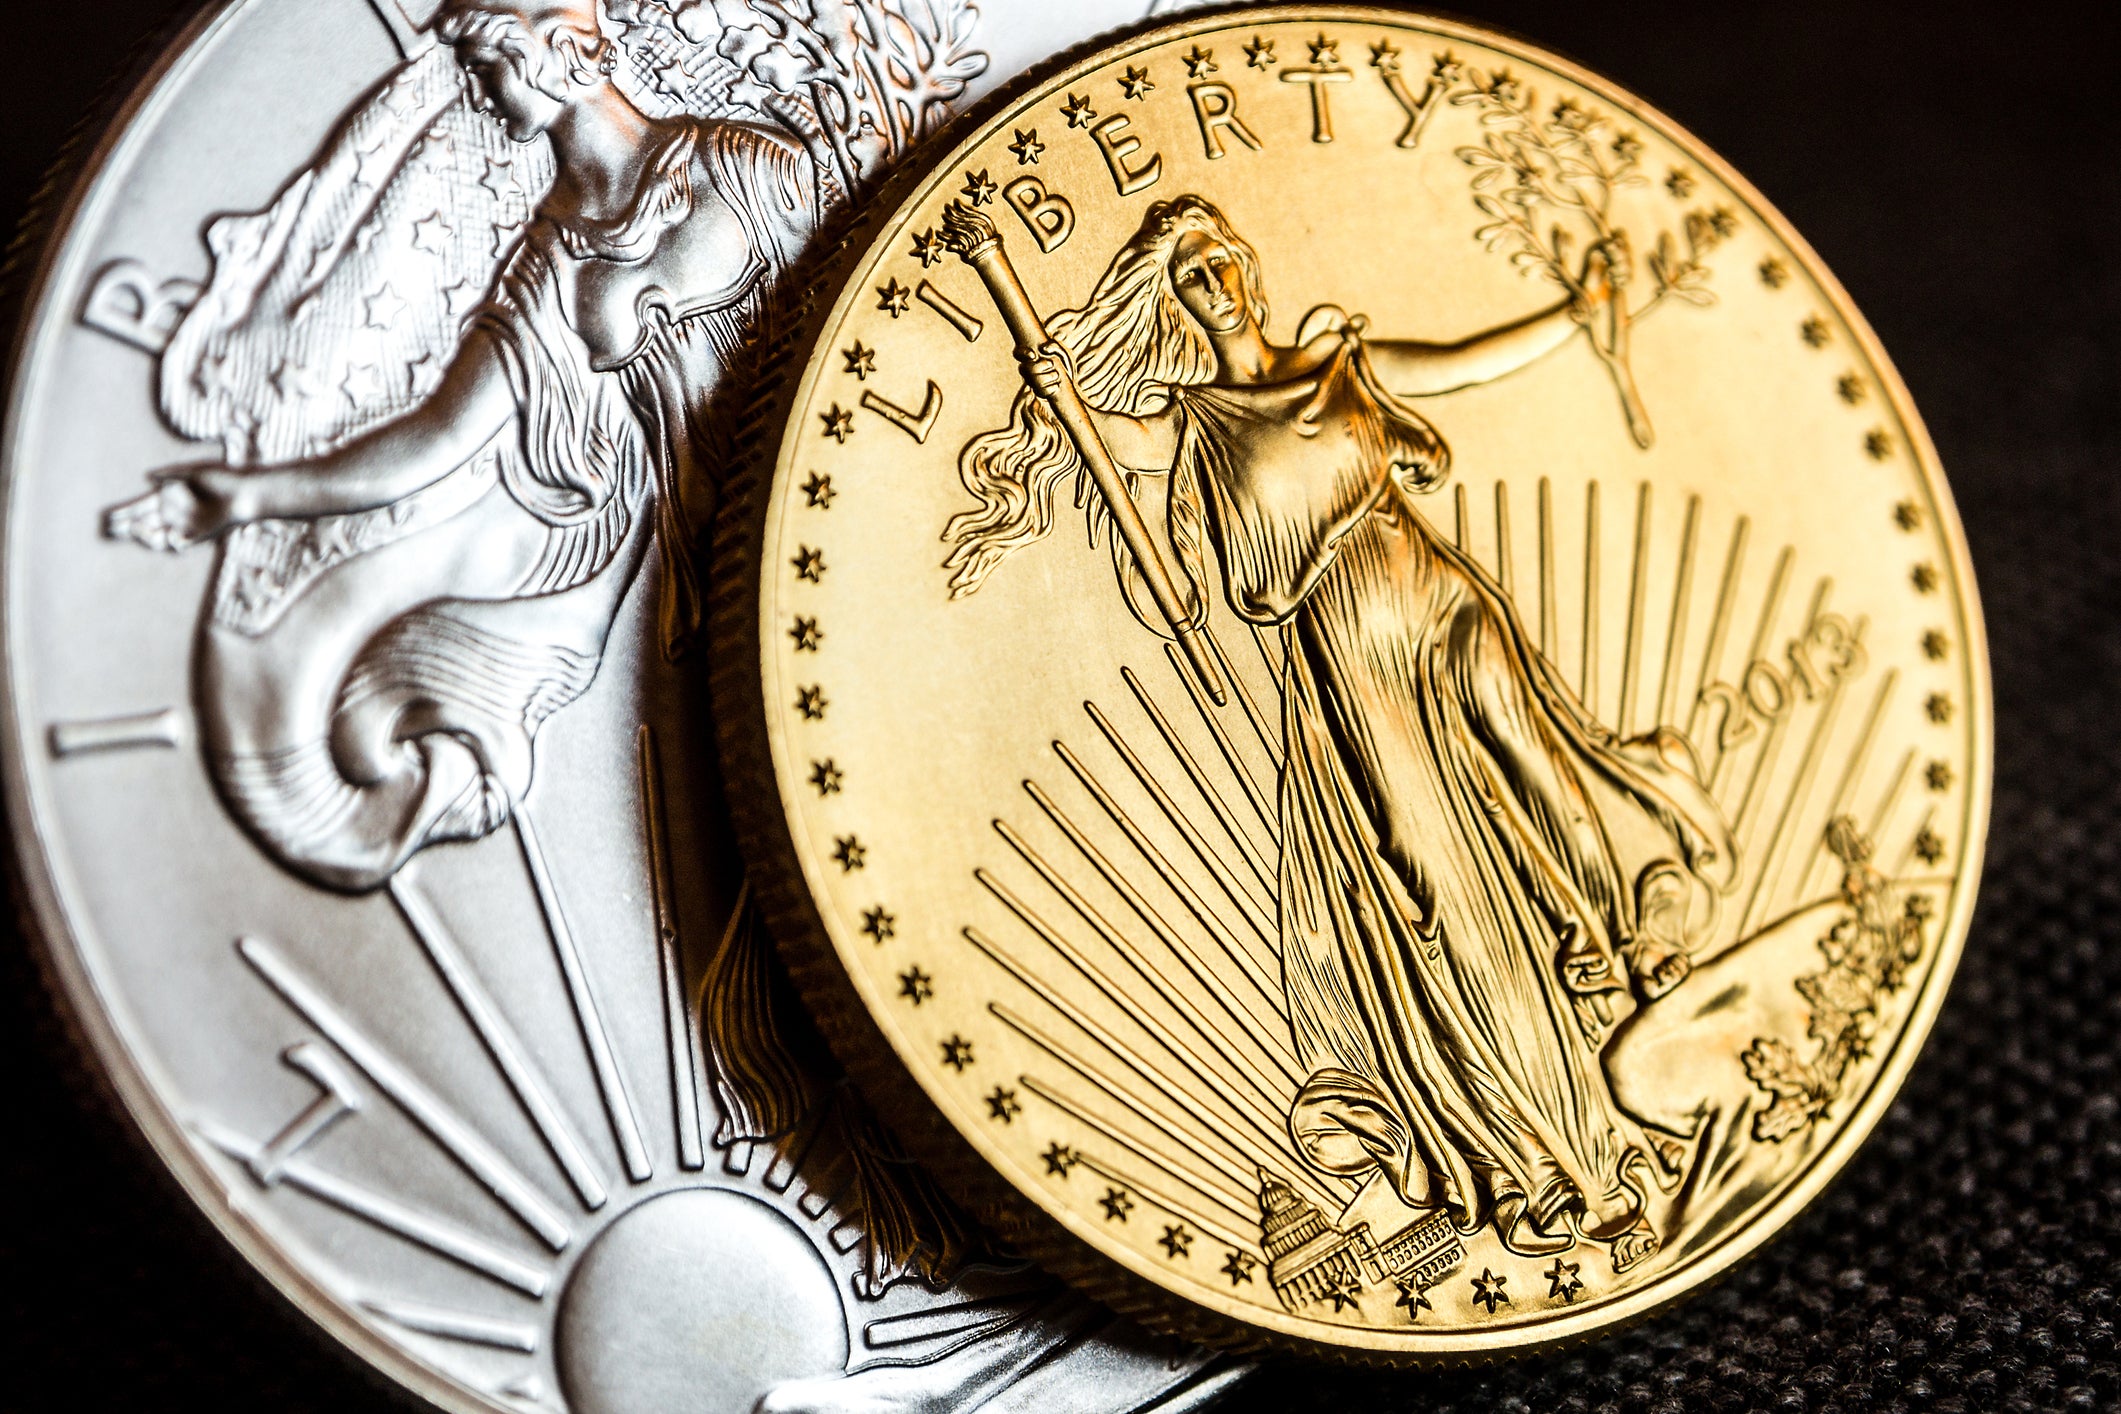 Ask a Fool: Should I Invest in Gold and Silver? | The Motley Fool